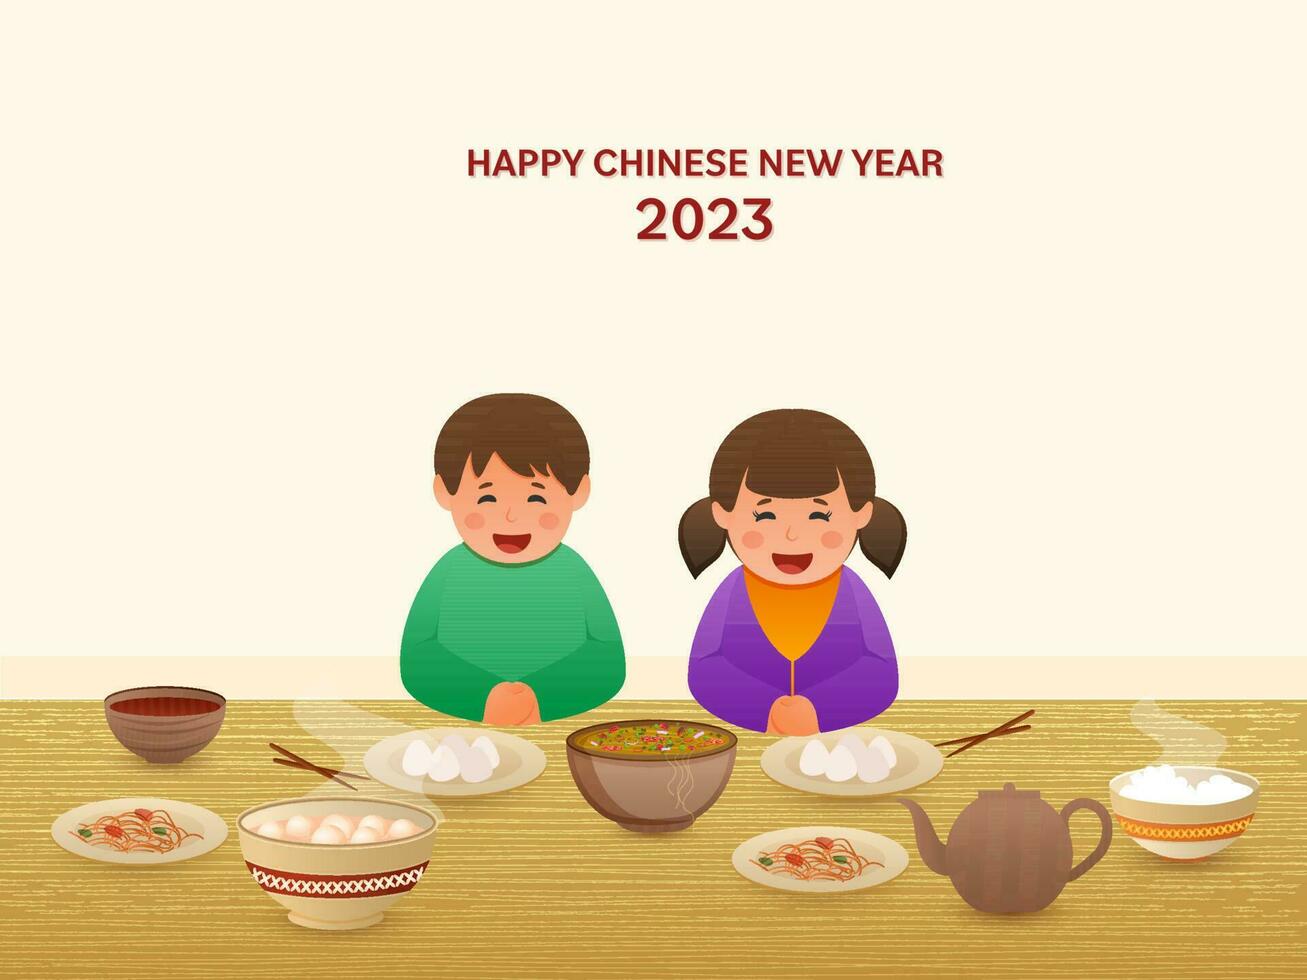 Cheerful Chinese Sitting In Front Of Delicious Meals On The Occasion Of Happy Chinese New Year 2023. vector